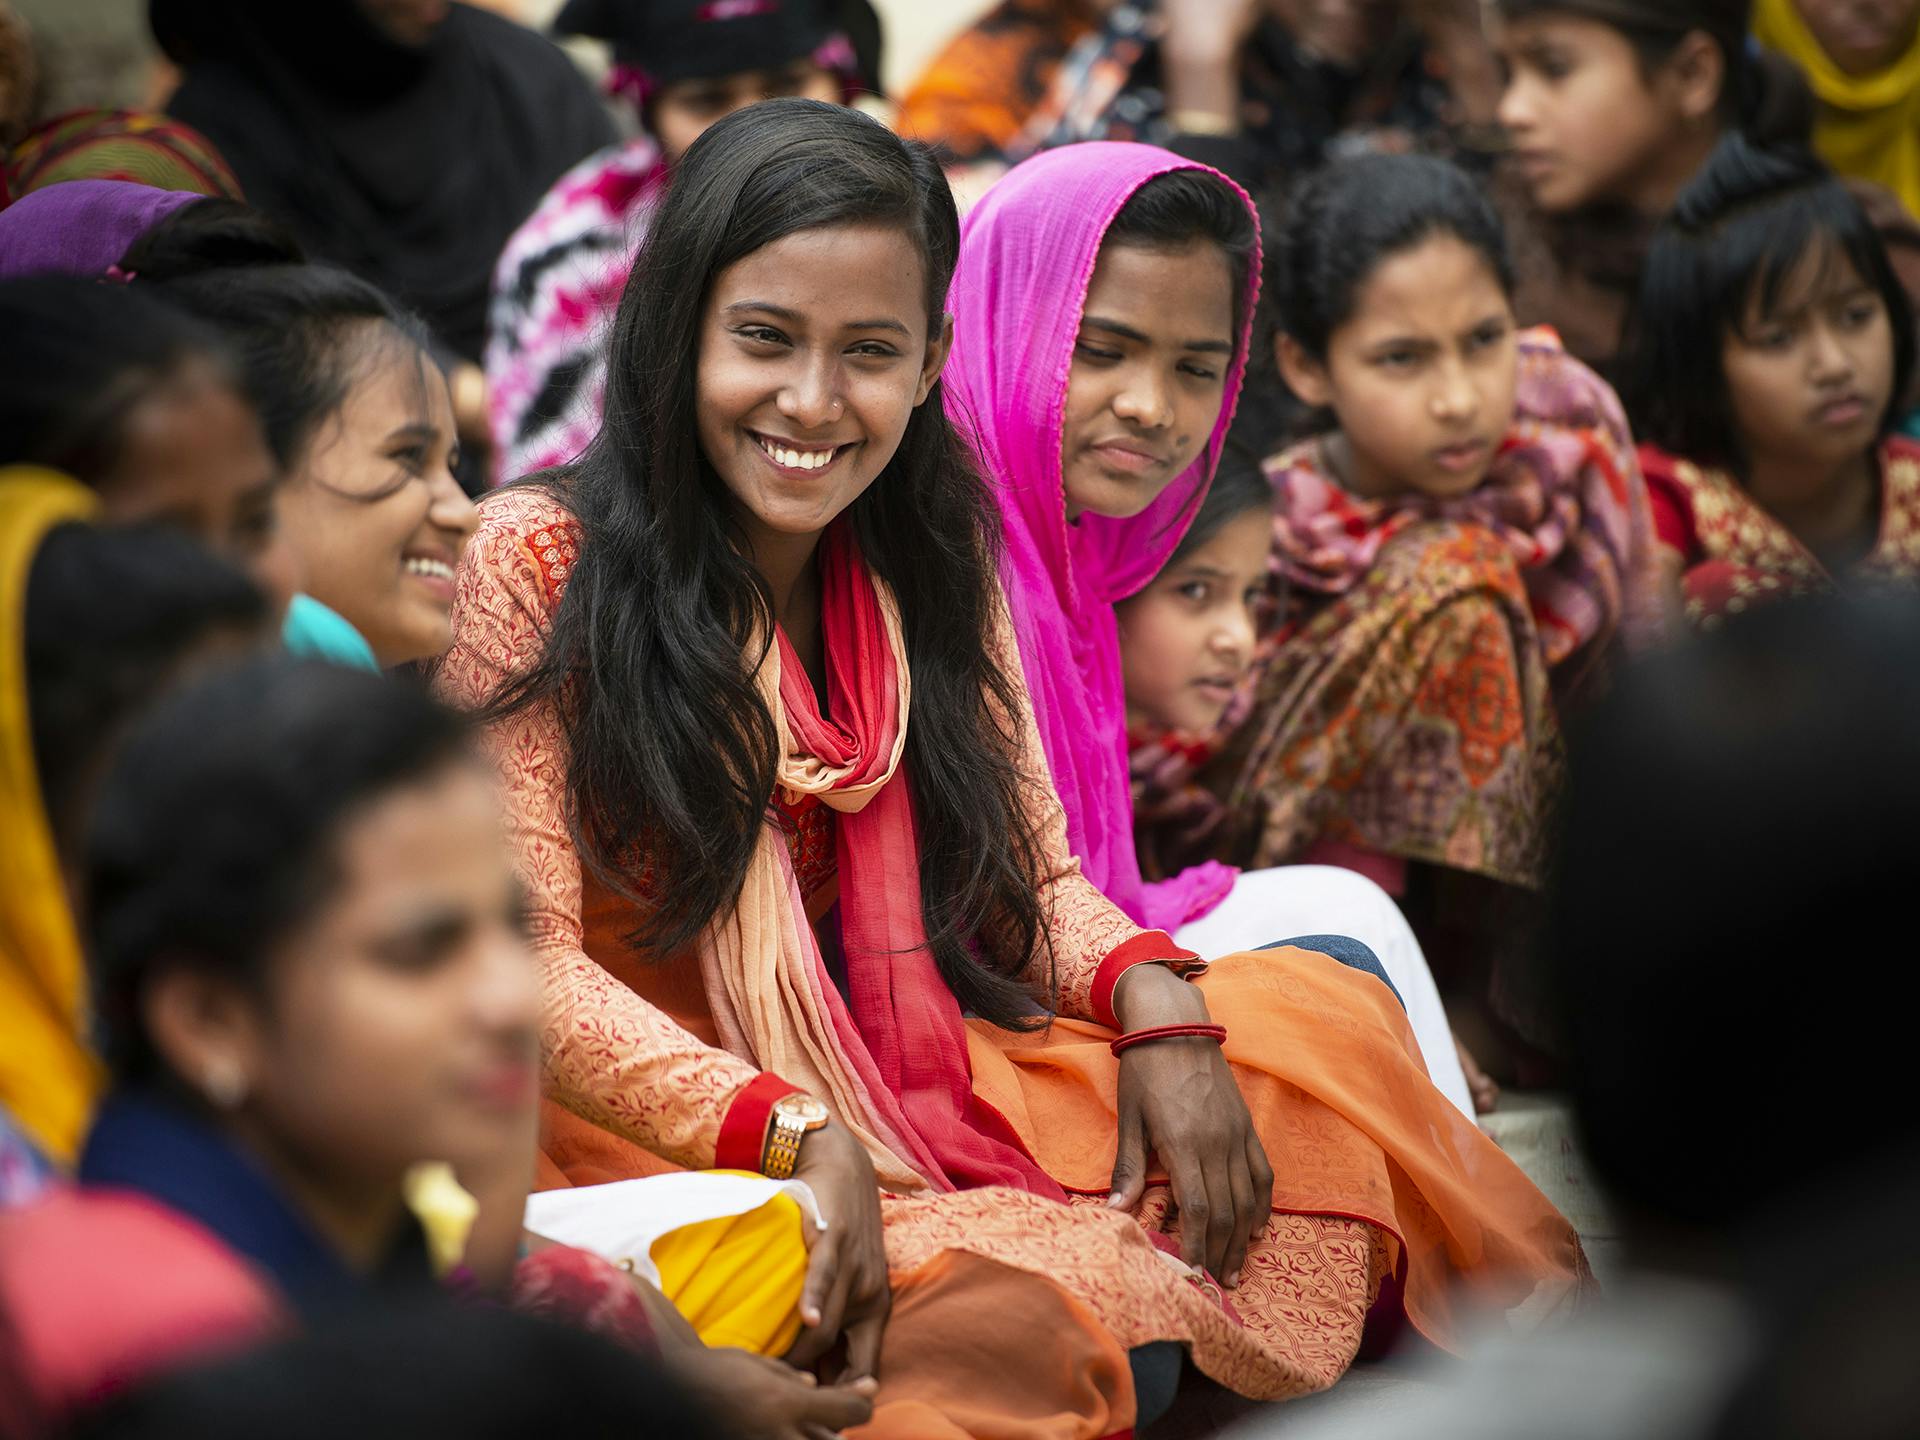 A woman sitting in a crowded group of people, smiling.